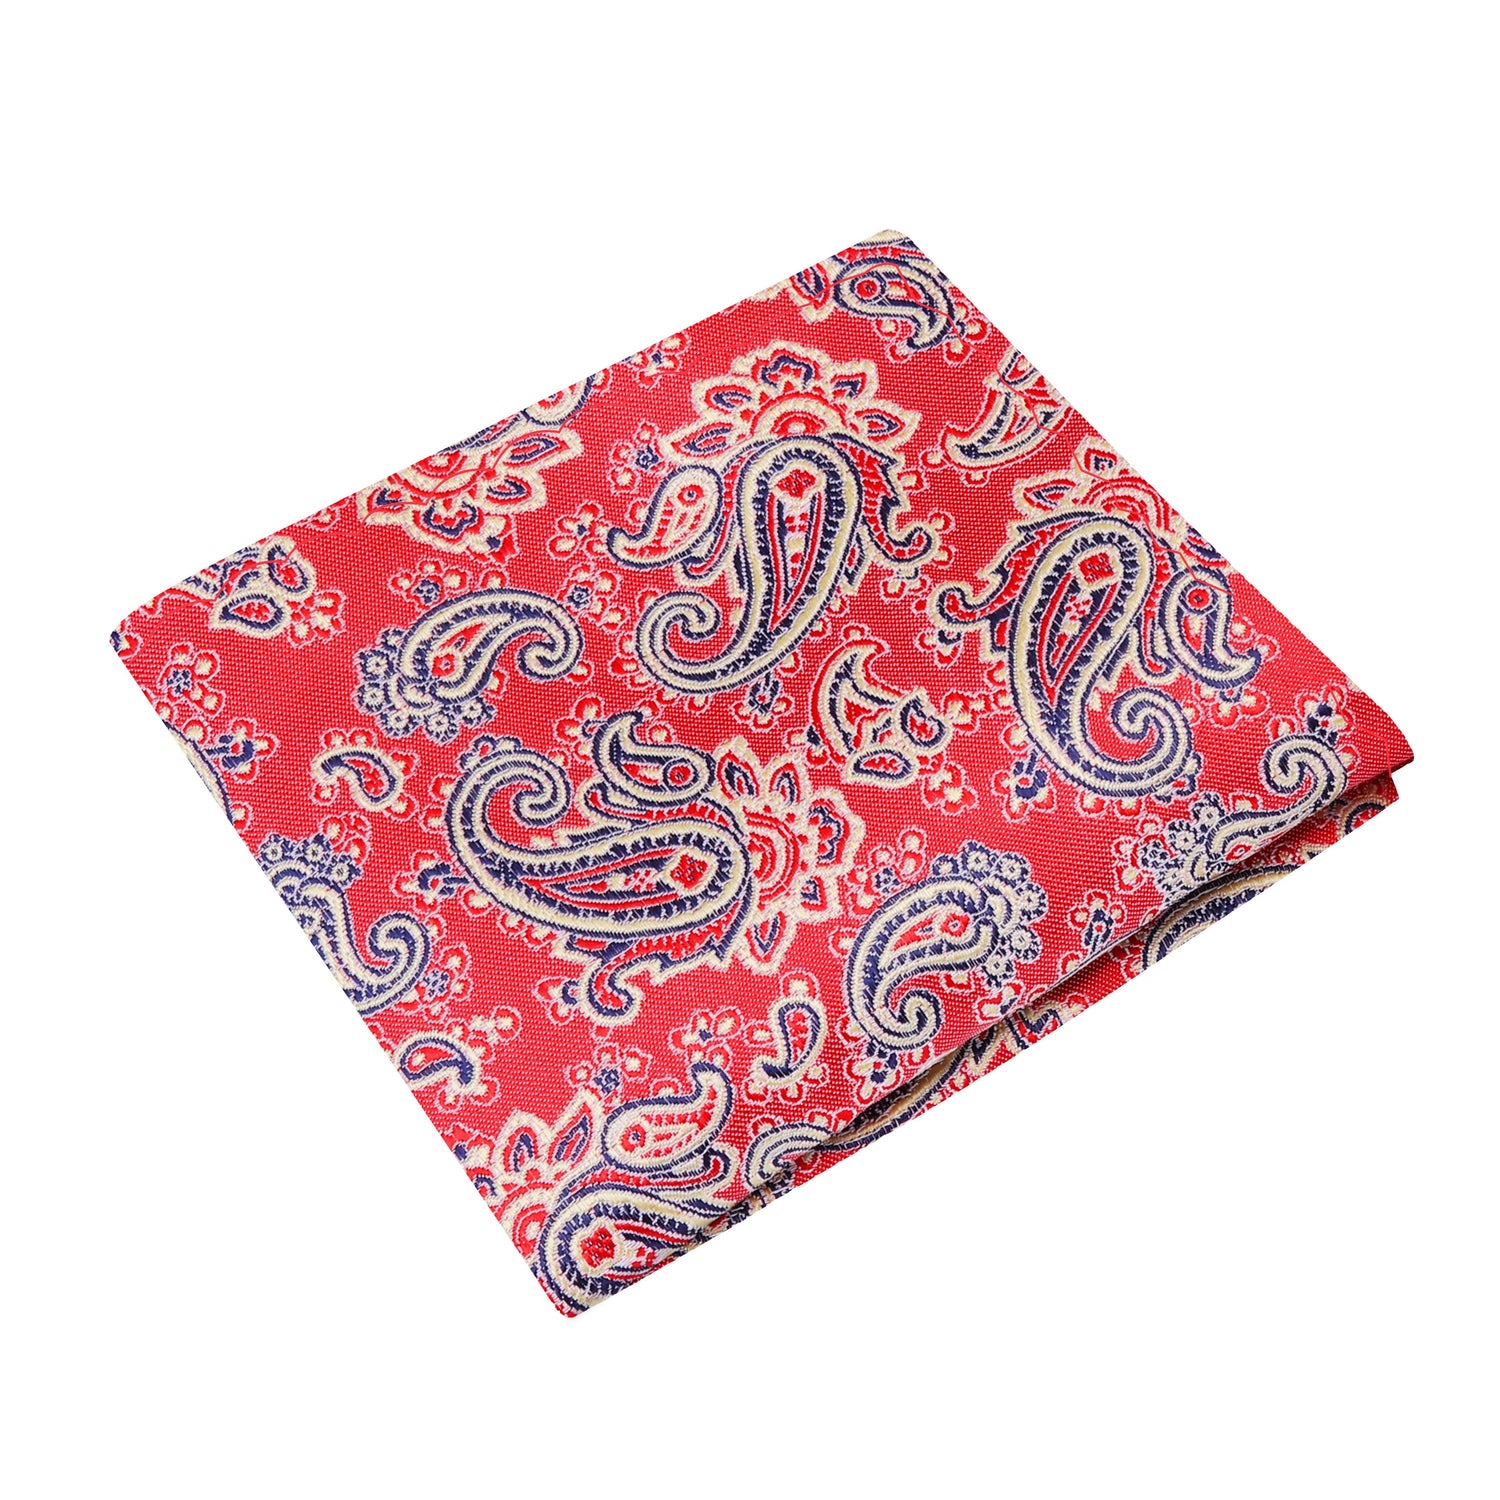 A Sunset Red and Gold Paisley Pocket Square